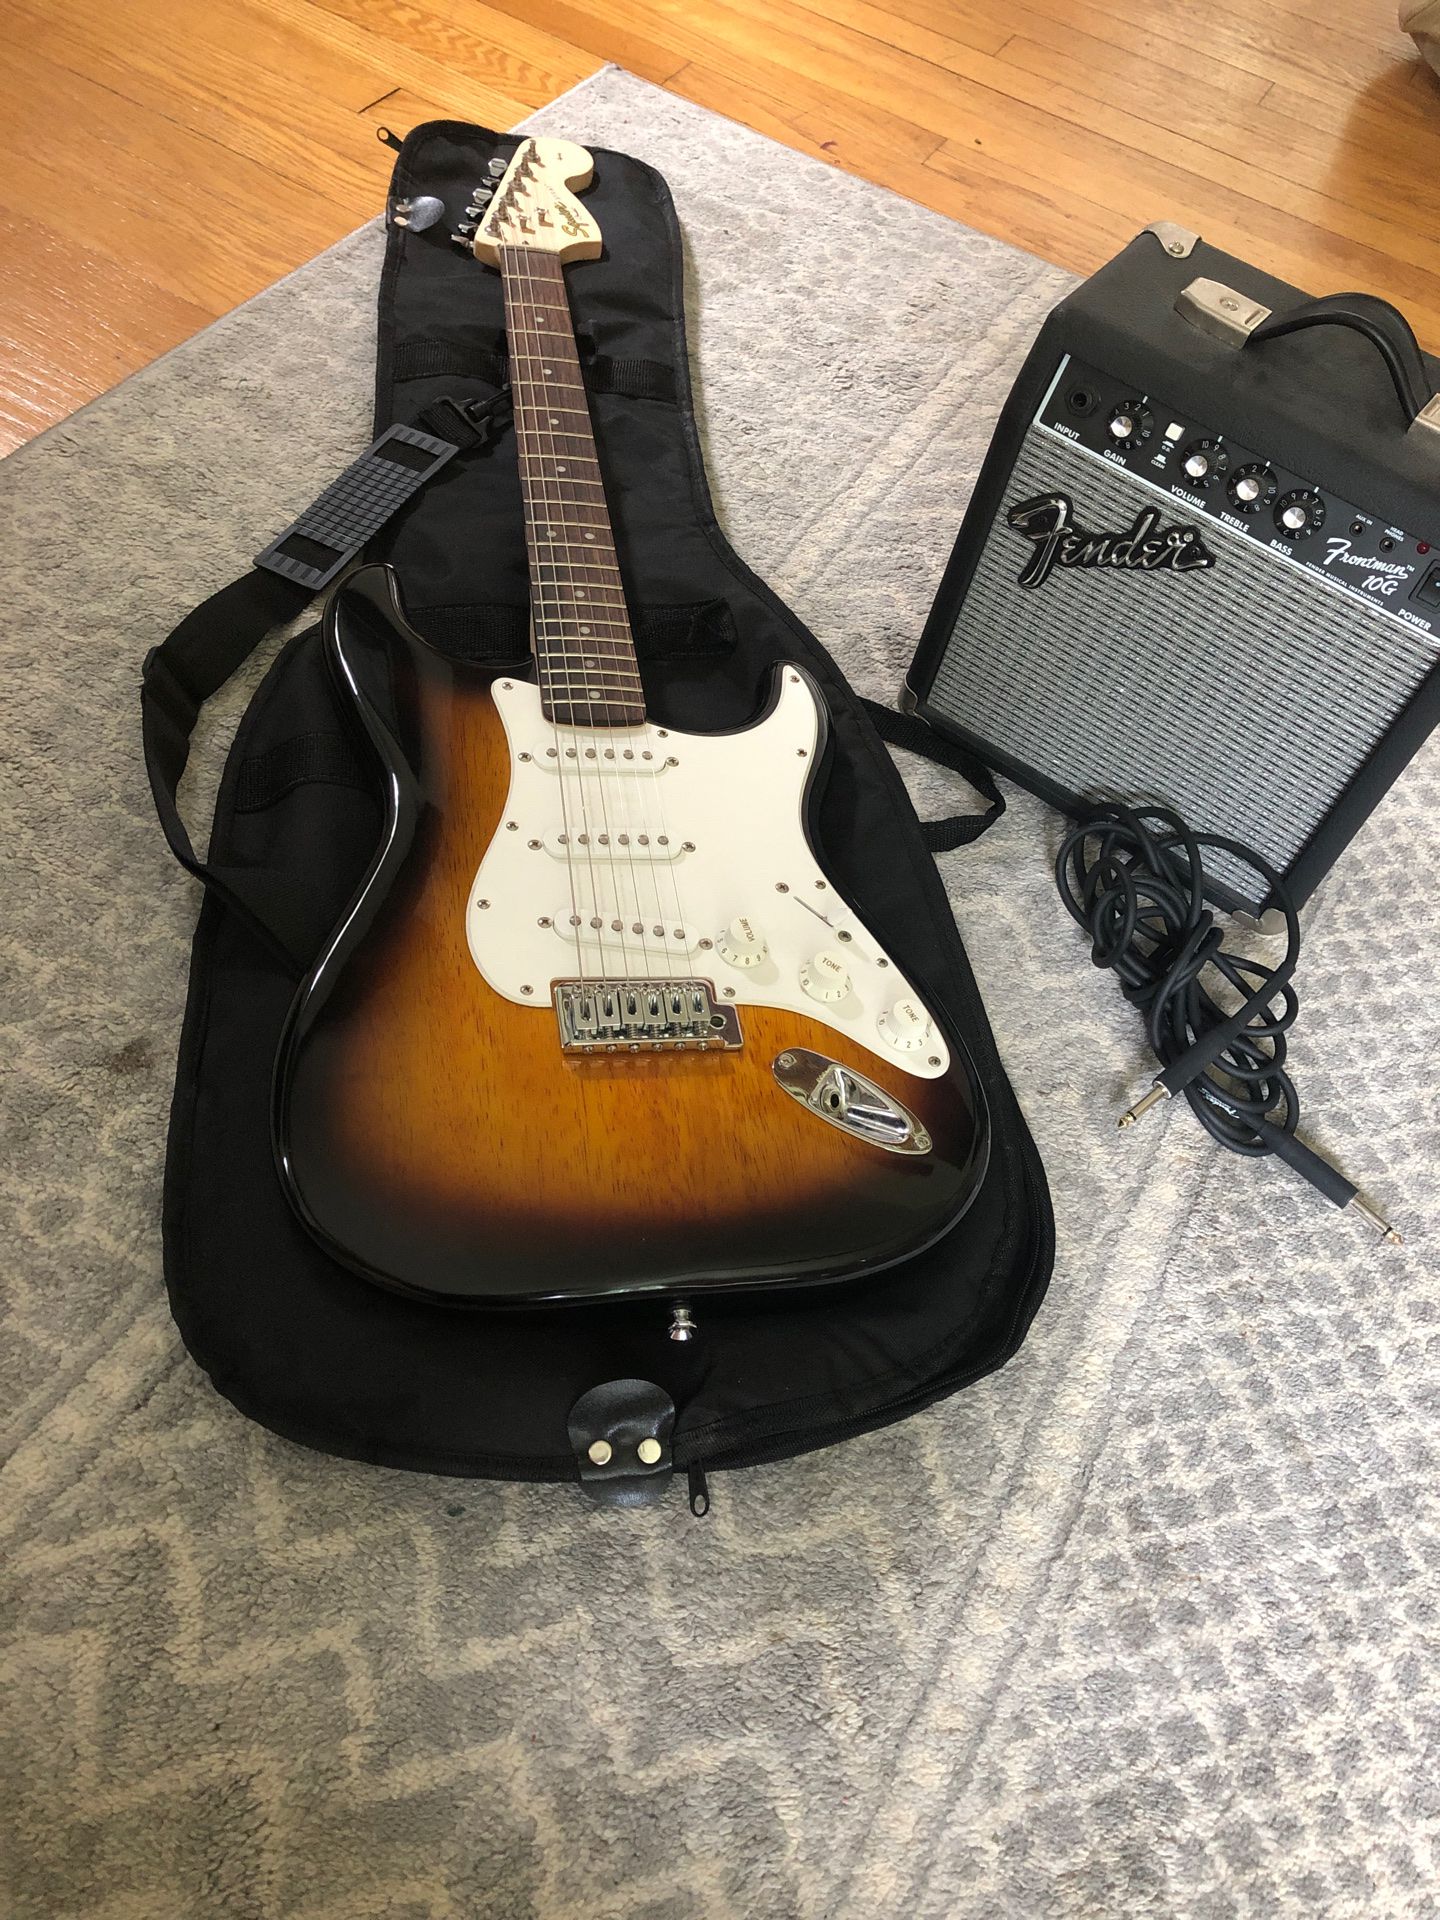 Electric guitar (comes with everything + optional game)